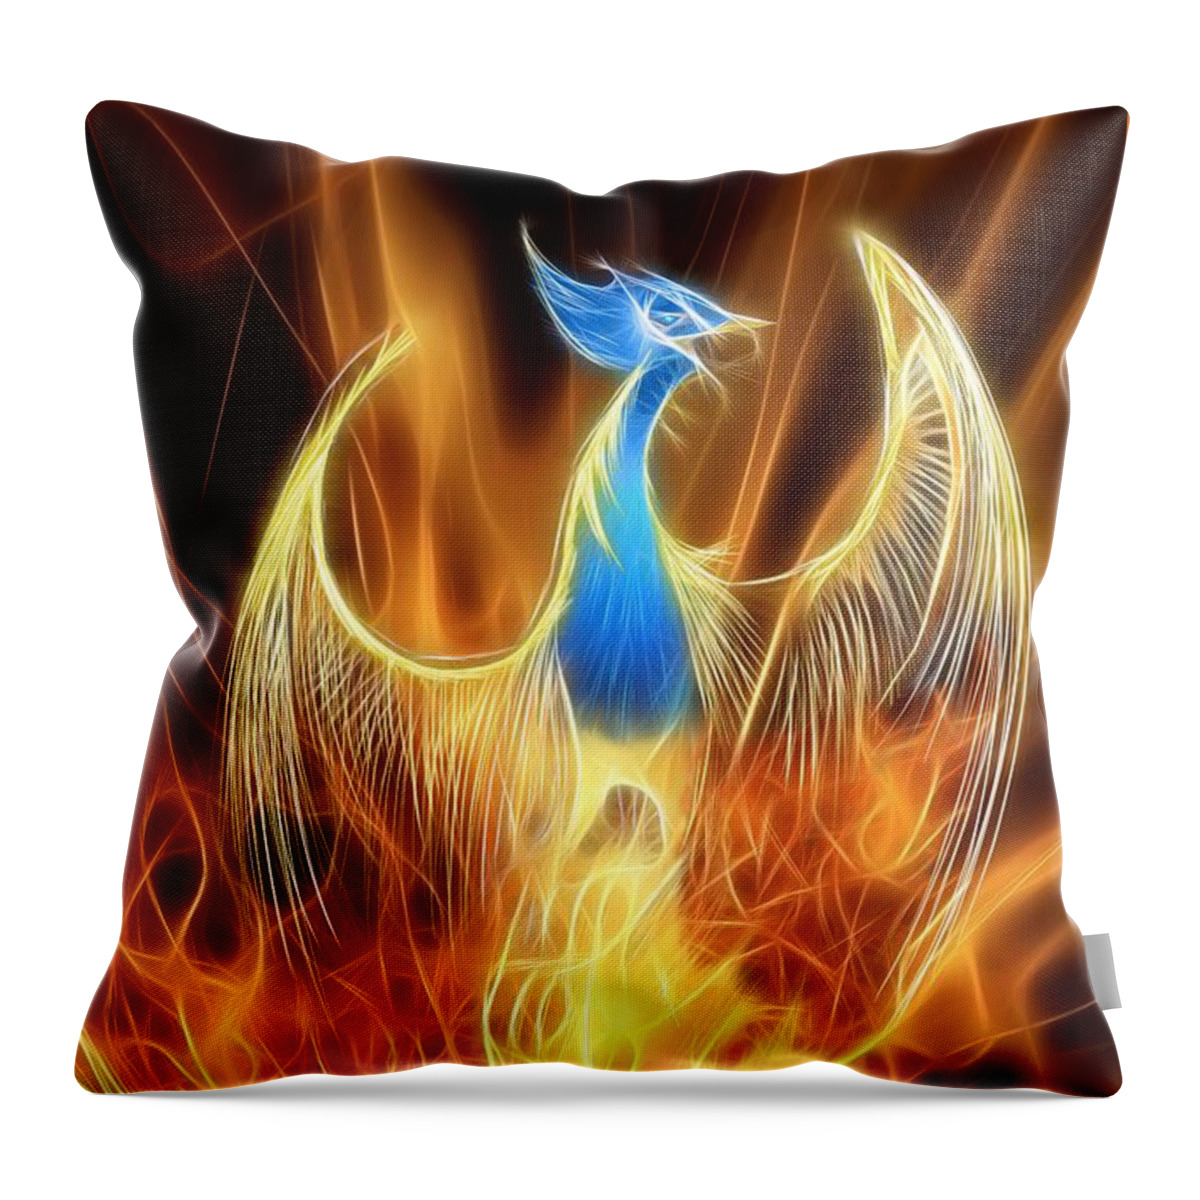 Mythology Throw Pillow featuring the digital art The Phoenix rises from the ashes by John Edwards